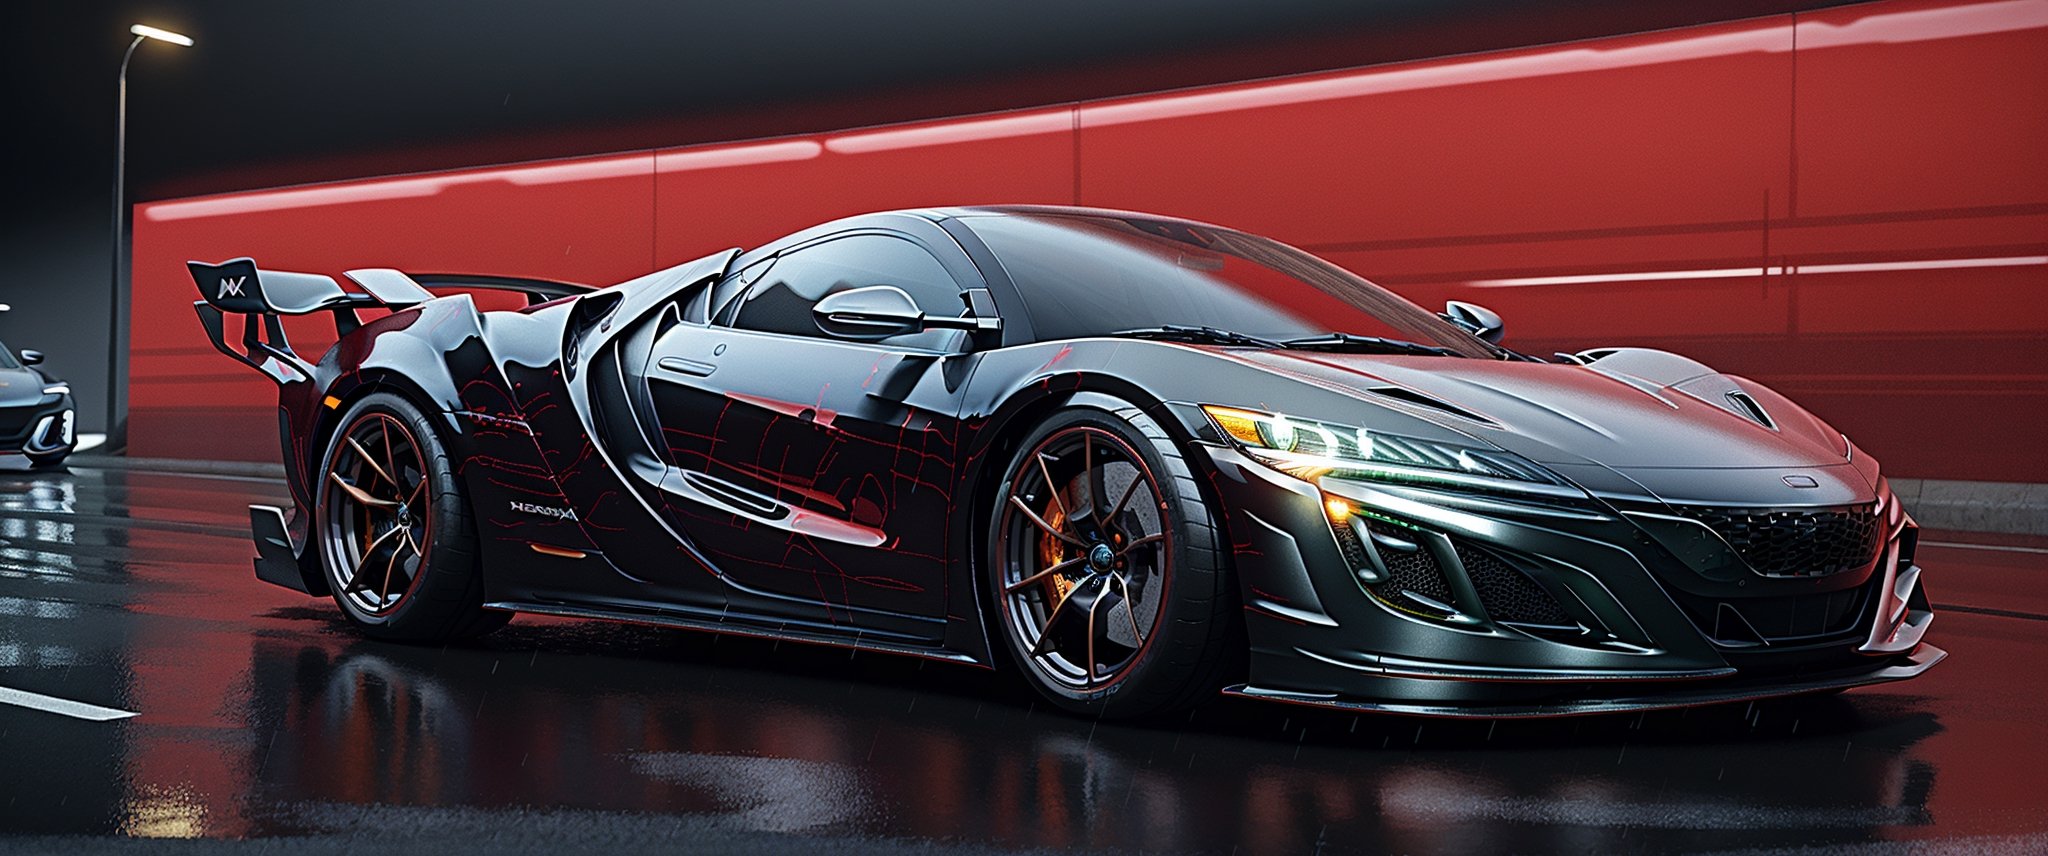 a close up of a car on a wet road with a red background, honda nsx, hyper real render, it has a red and black paint, render of futuristic supercar, with sleek lines and a powerful, ultra render, concept art. 8 k, daniel maidman octane rendering, hyper realistic render, mclaren, artistic render, concept car design,Car